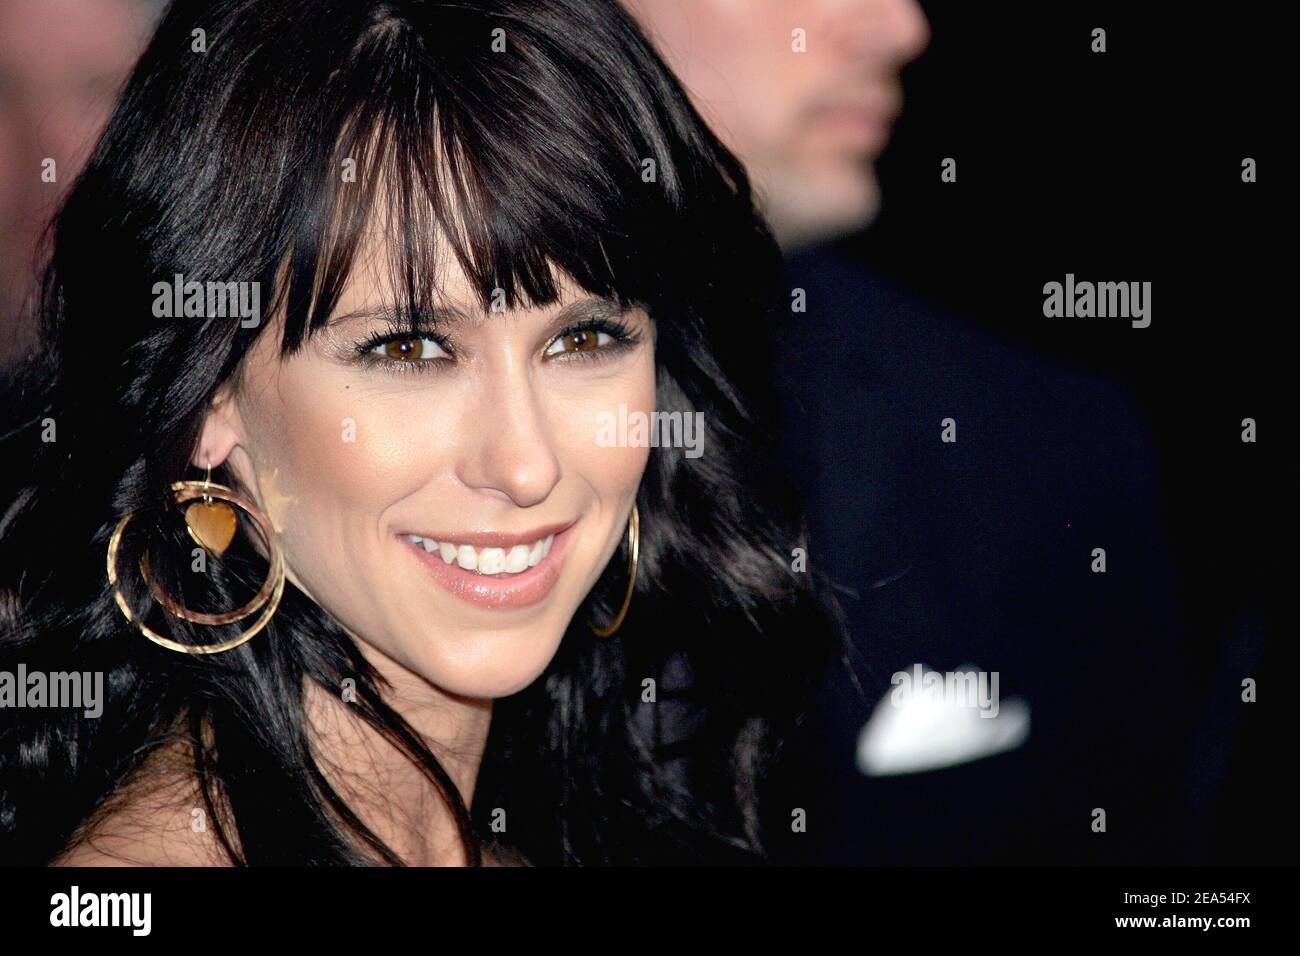 U.S actress Jennifer Love Hewitt at the Ed Sullivan Theatre for a guest appearance on the David Letterman Show in New York City, NY, USA, on September 20, 2005. Photo by Charles Guerin/ABACAPRESS.COM. Stock Photo